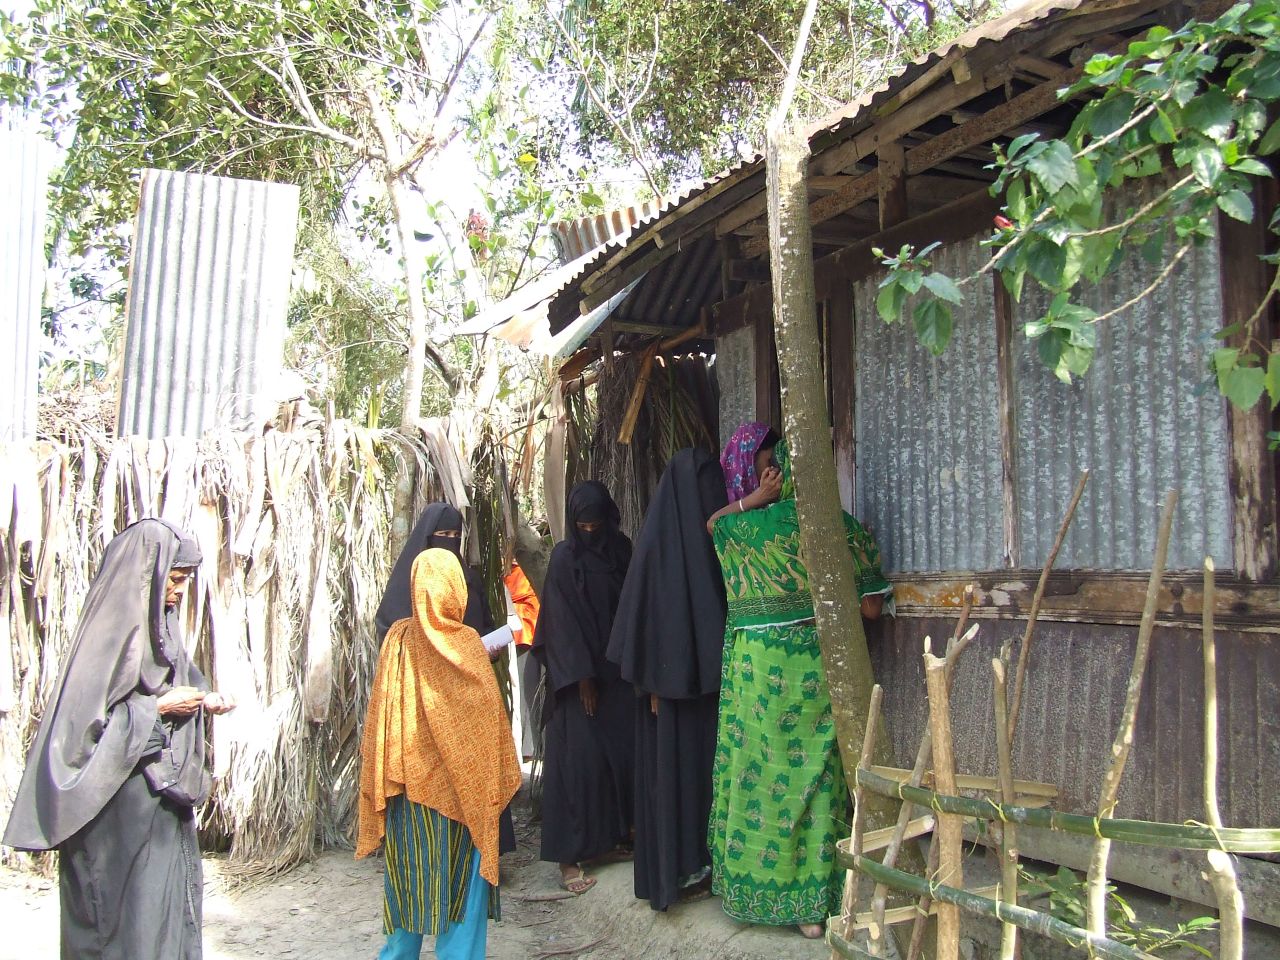 women in colorful dresses standing outside of shack